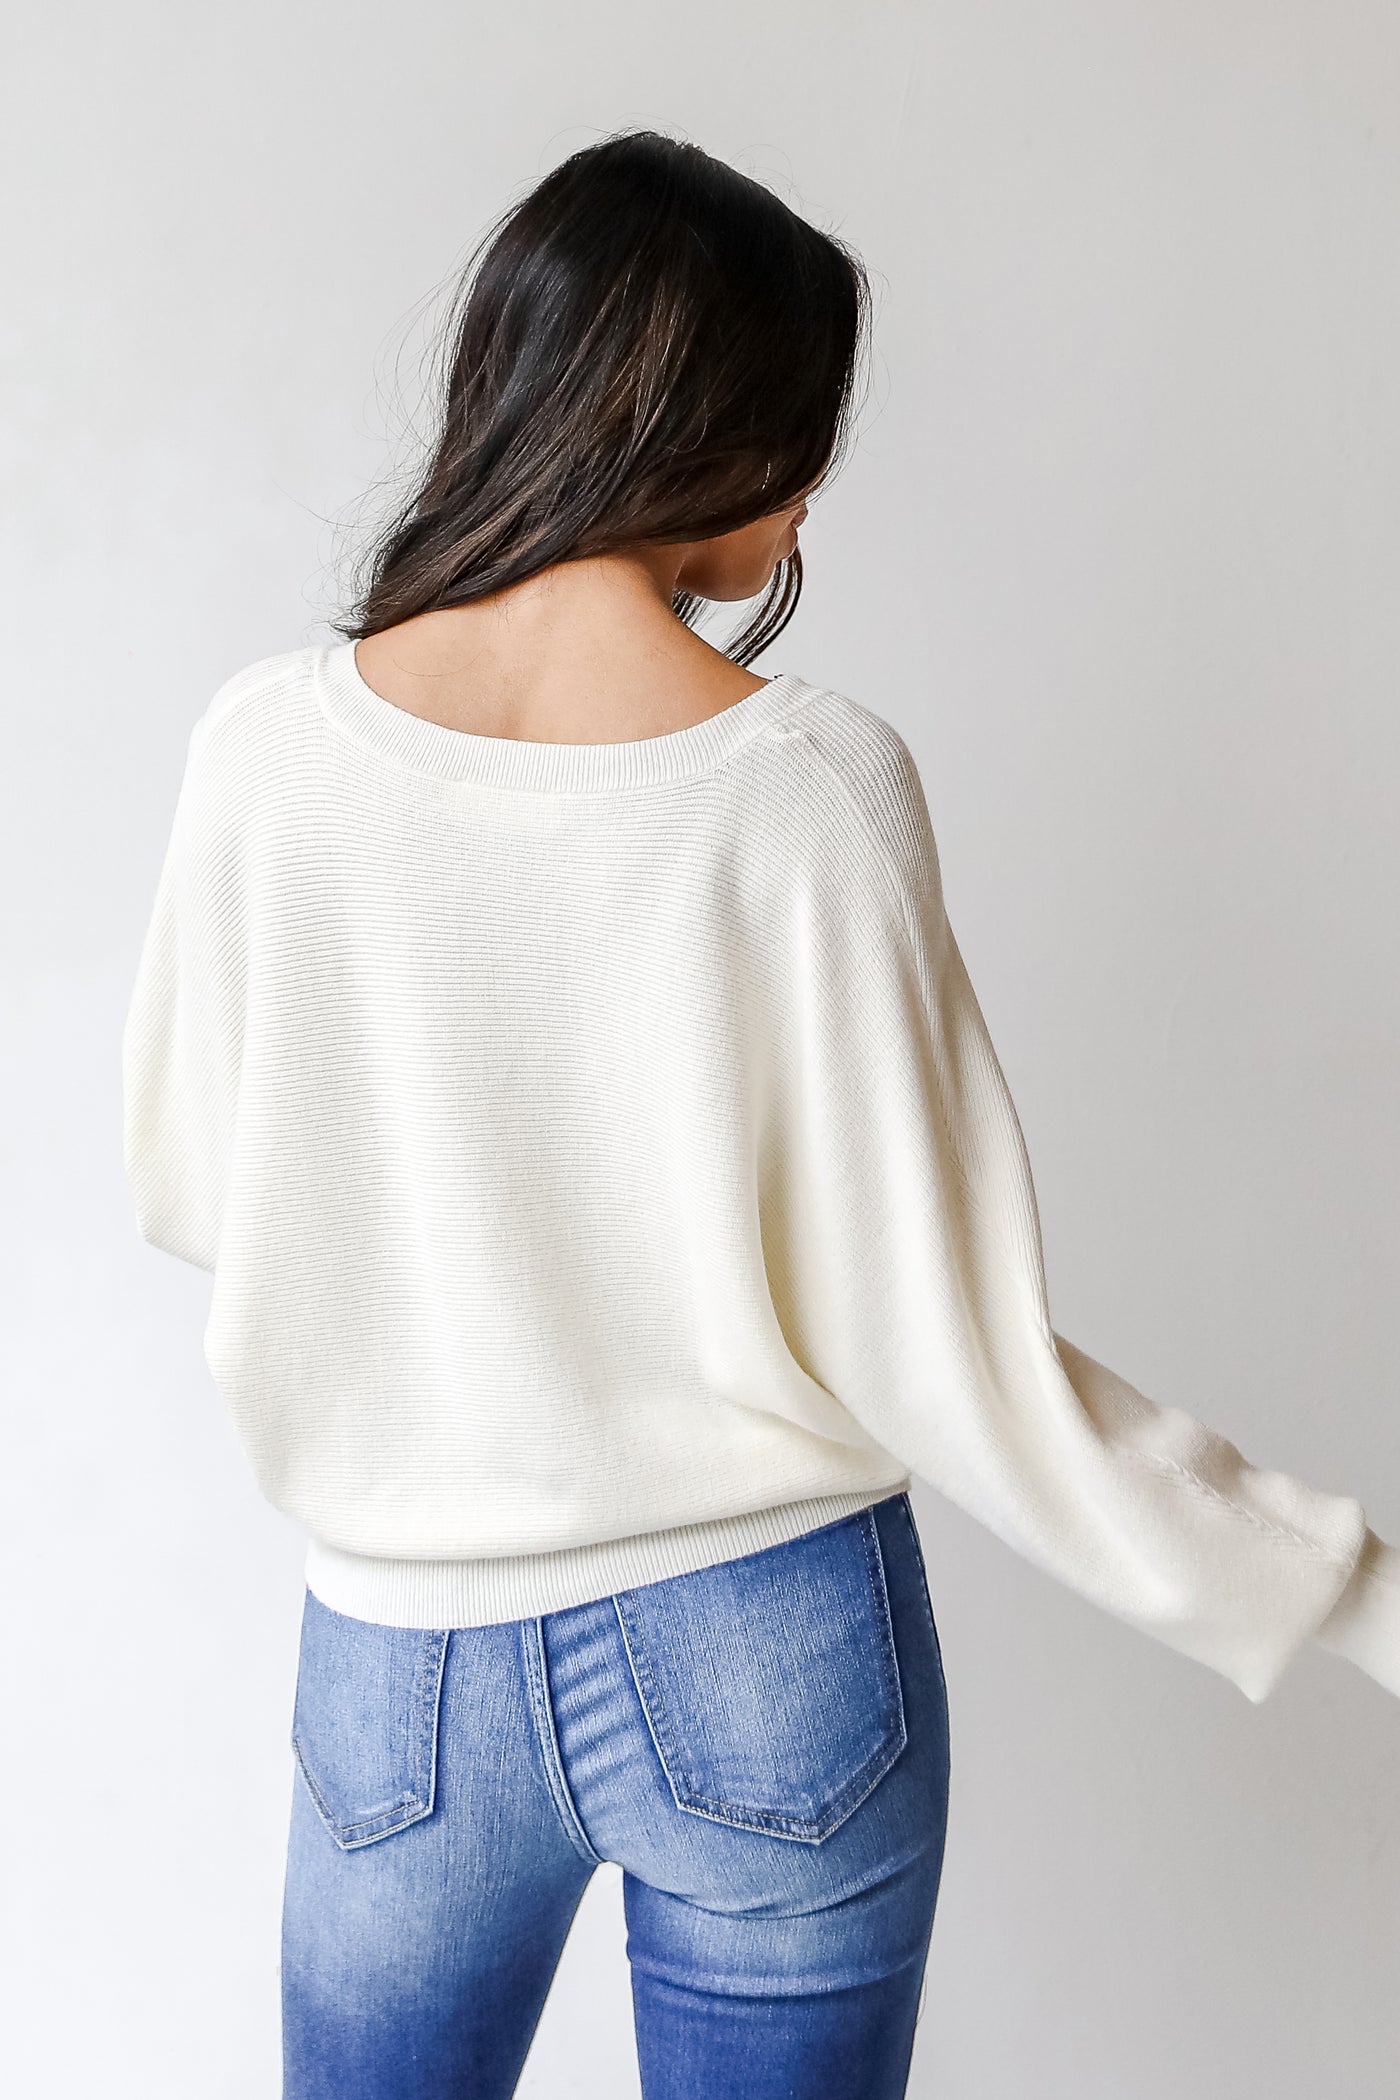 Sweater in ivory back view